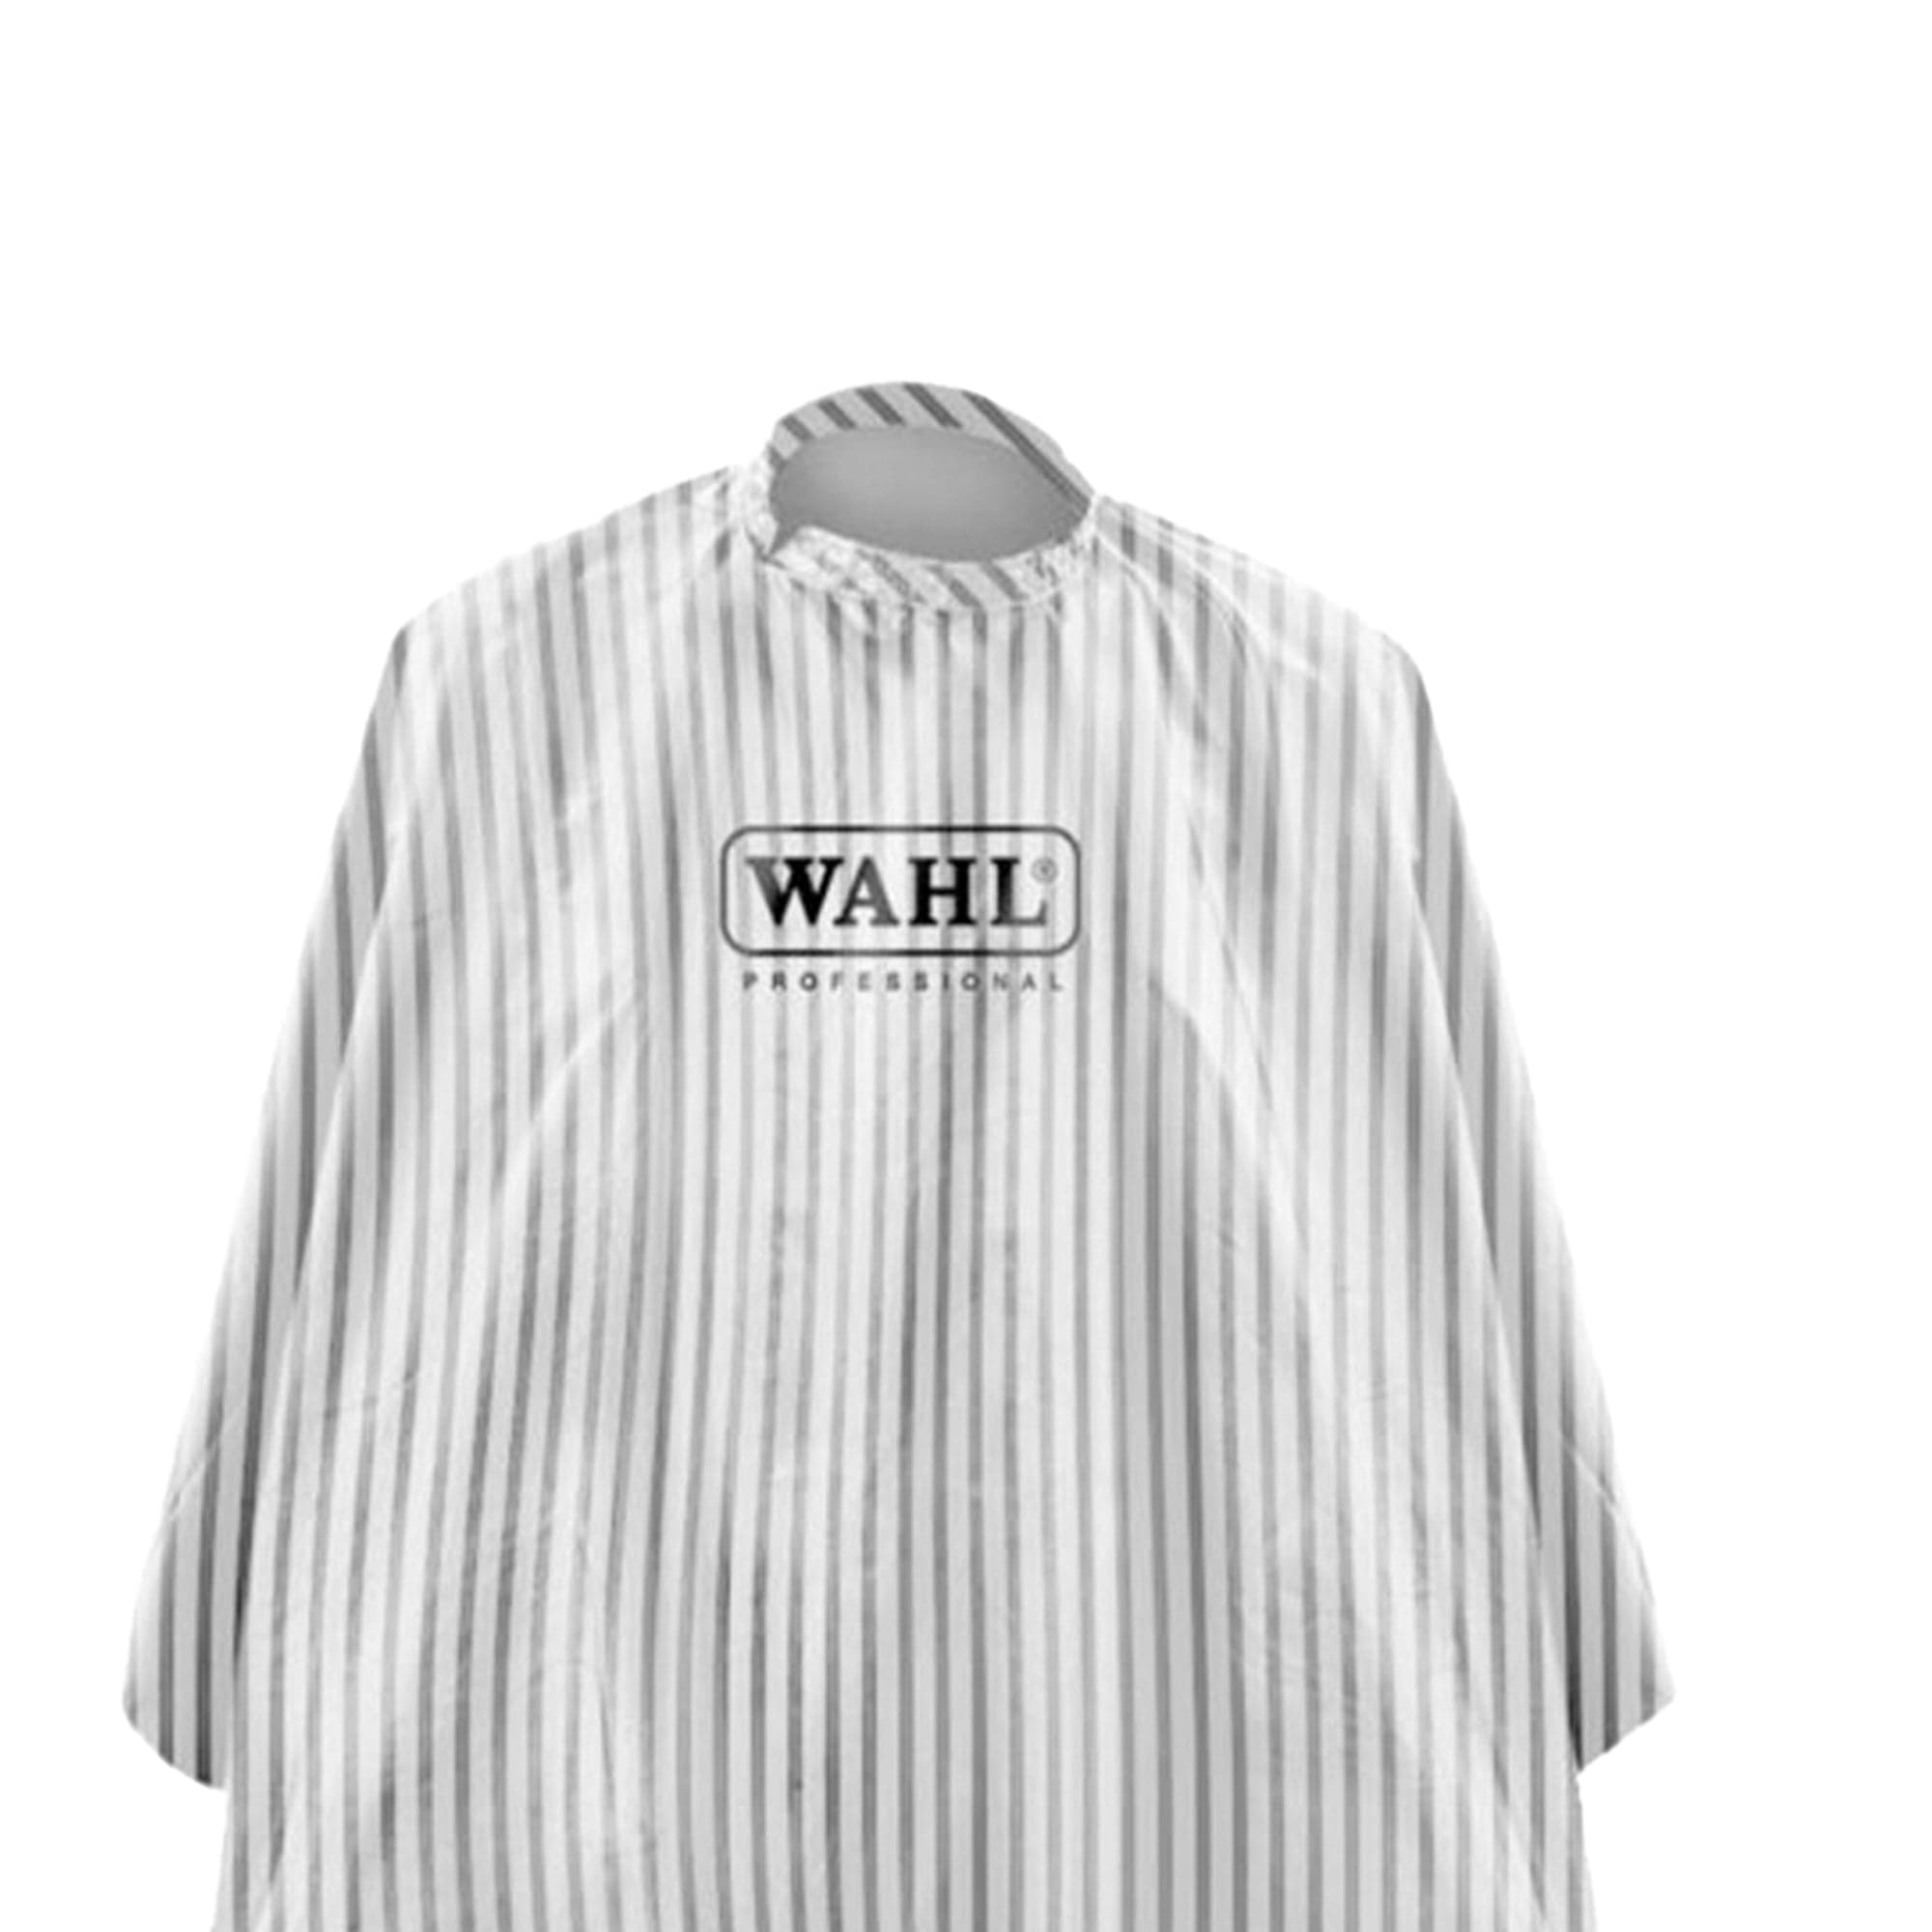 Wahl - Barber Hairdressing Hair Cutting Cape & Gown Black & White Stripes